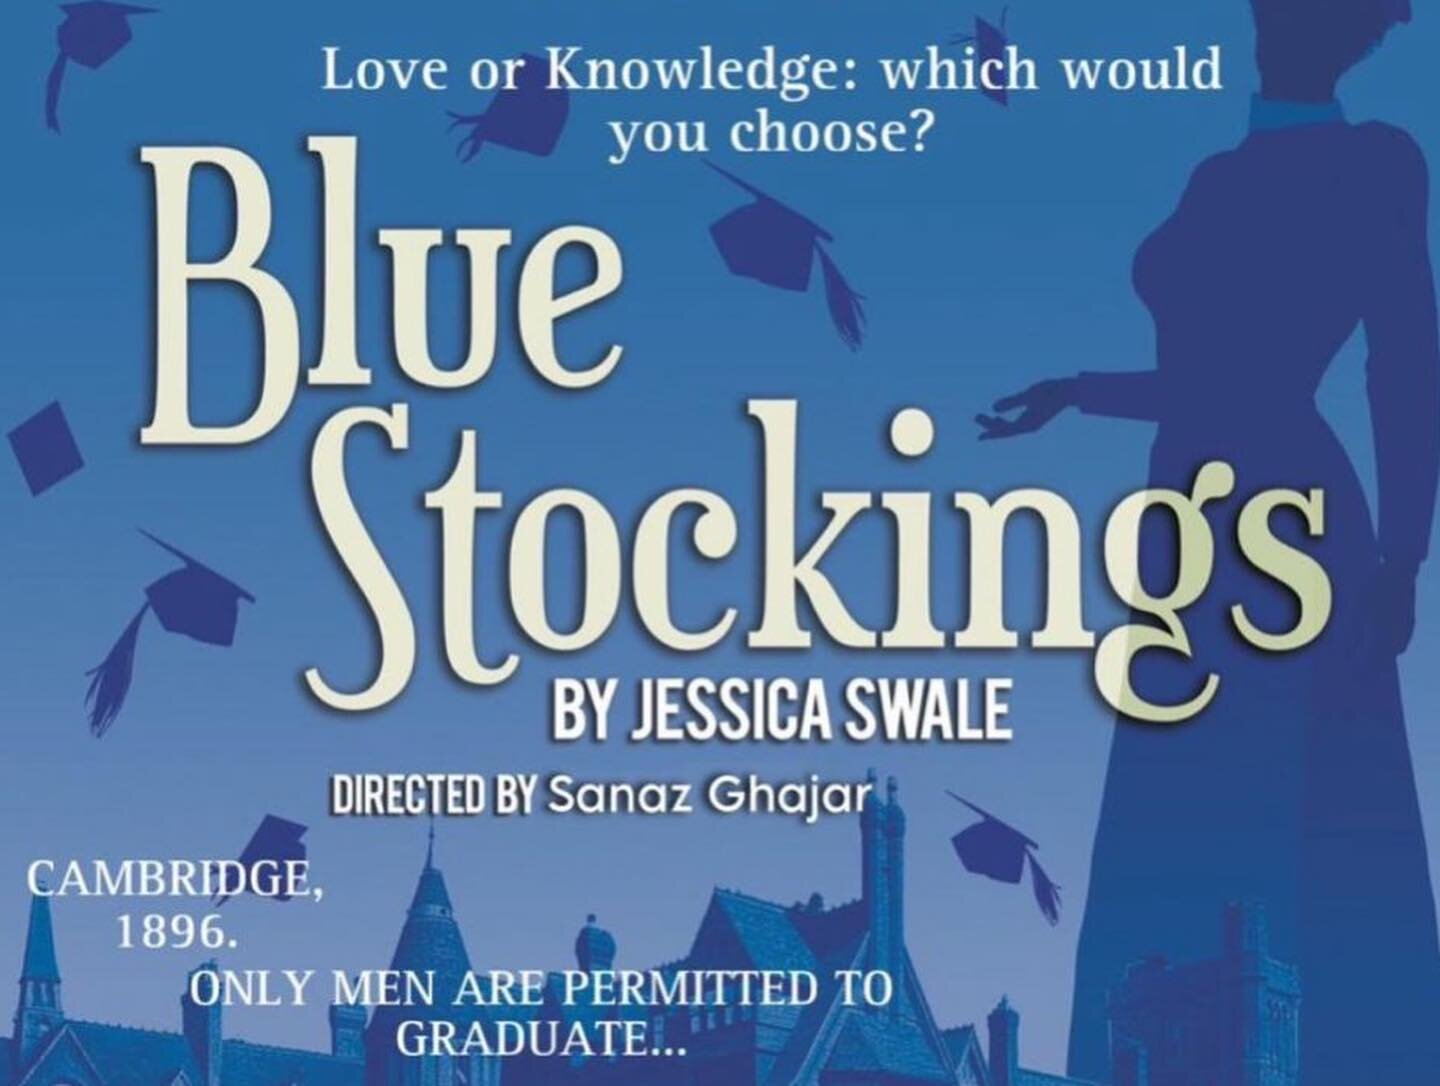 [Blue Stockings]
My dears, you did a great job!!! &ldquo;Love or knowledge, what is your choice?&rdquo; OMG, I want BOTH!!! Lol 

Really beautiful work, my loved ones!!! The use of the space, the connections you had with one another. I enjoyed it so 